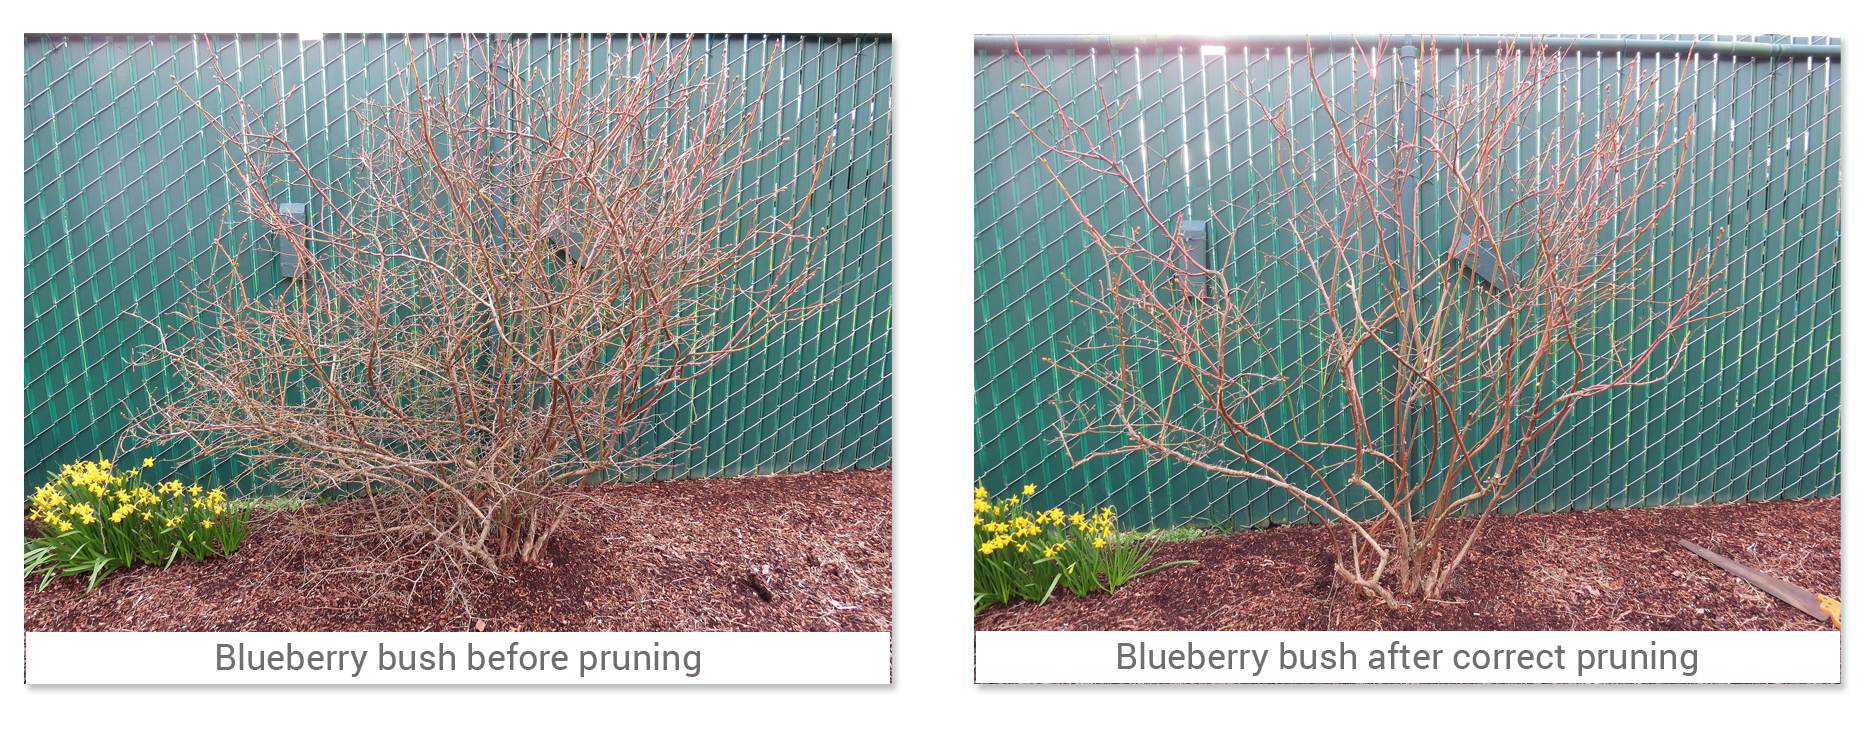 Pick up the pruners and head for the blueberries